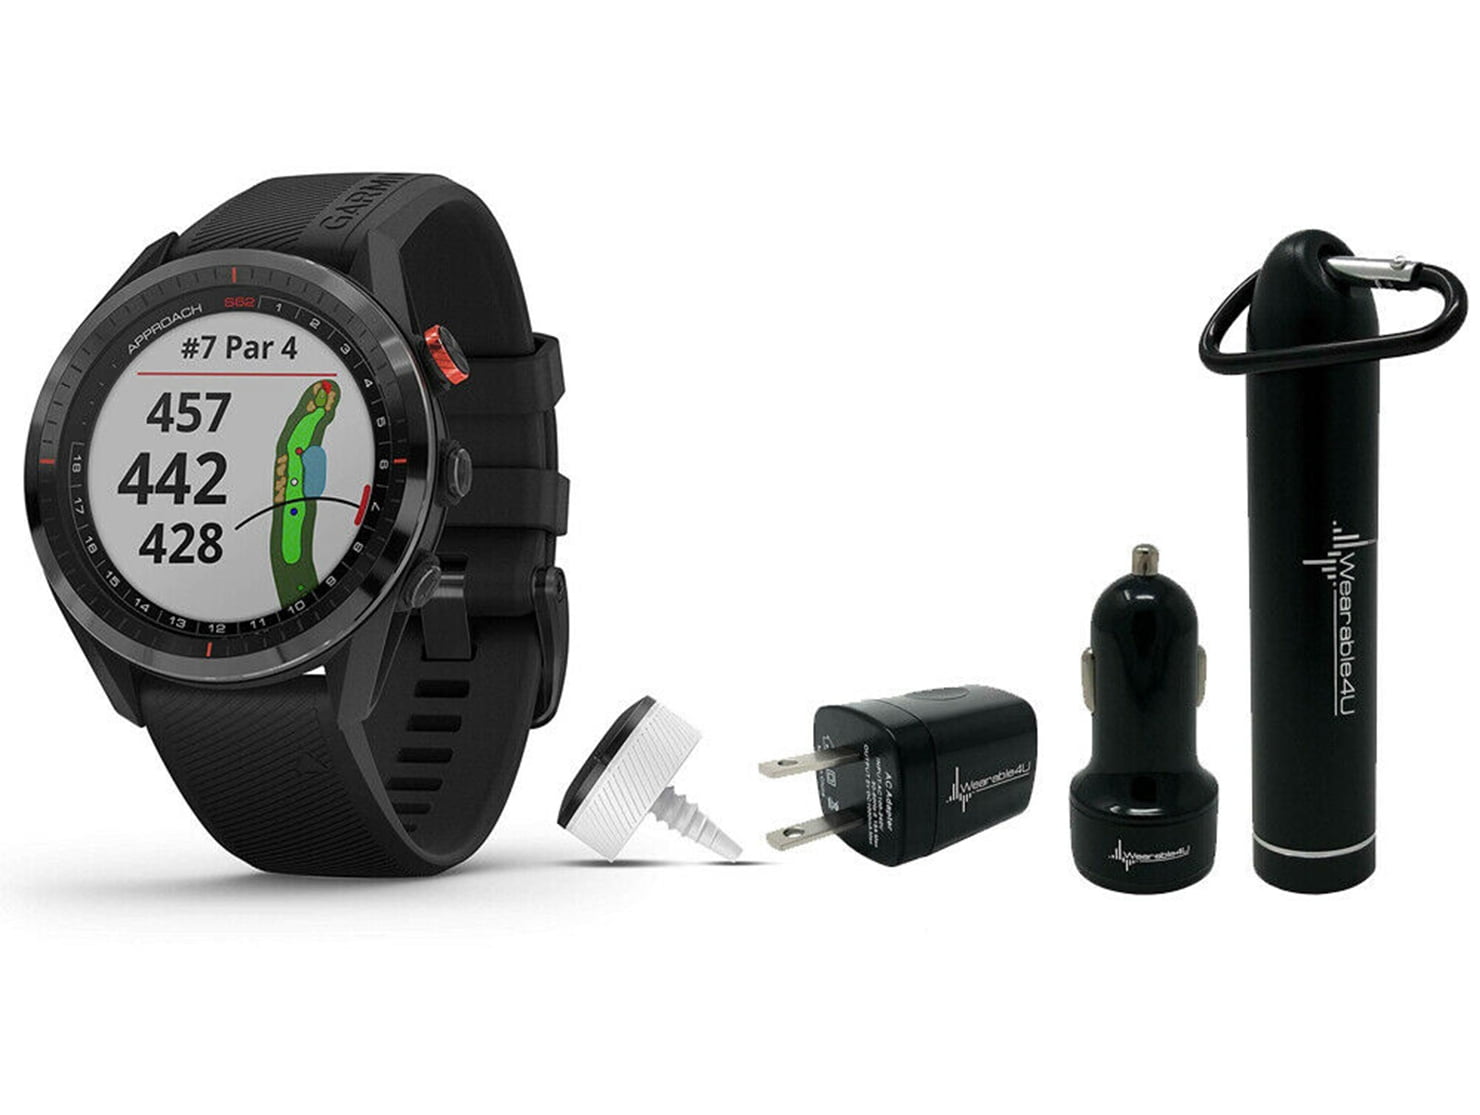 Garmin Approach S62 Premium GPS Golf Watch and All-In-One Golf 